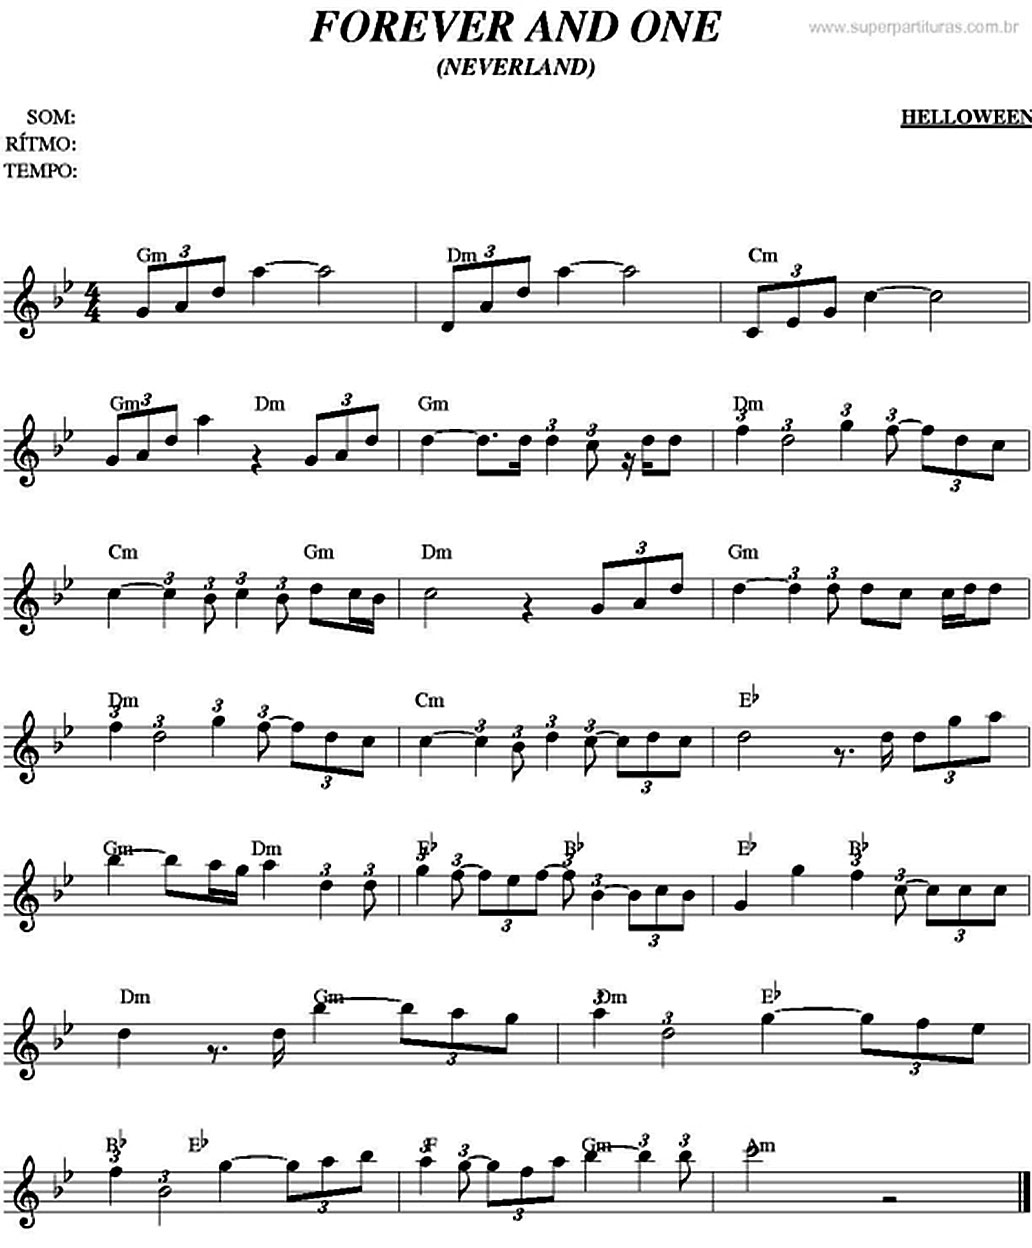 forever and one sheet music notes